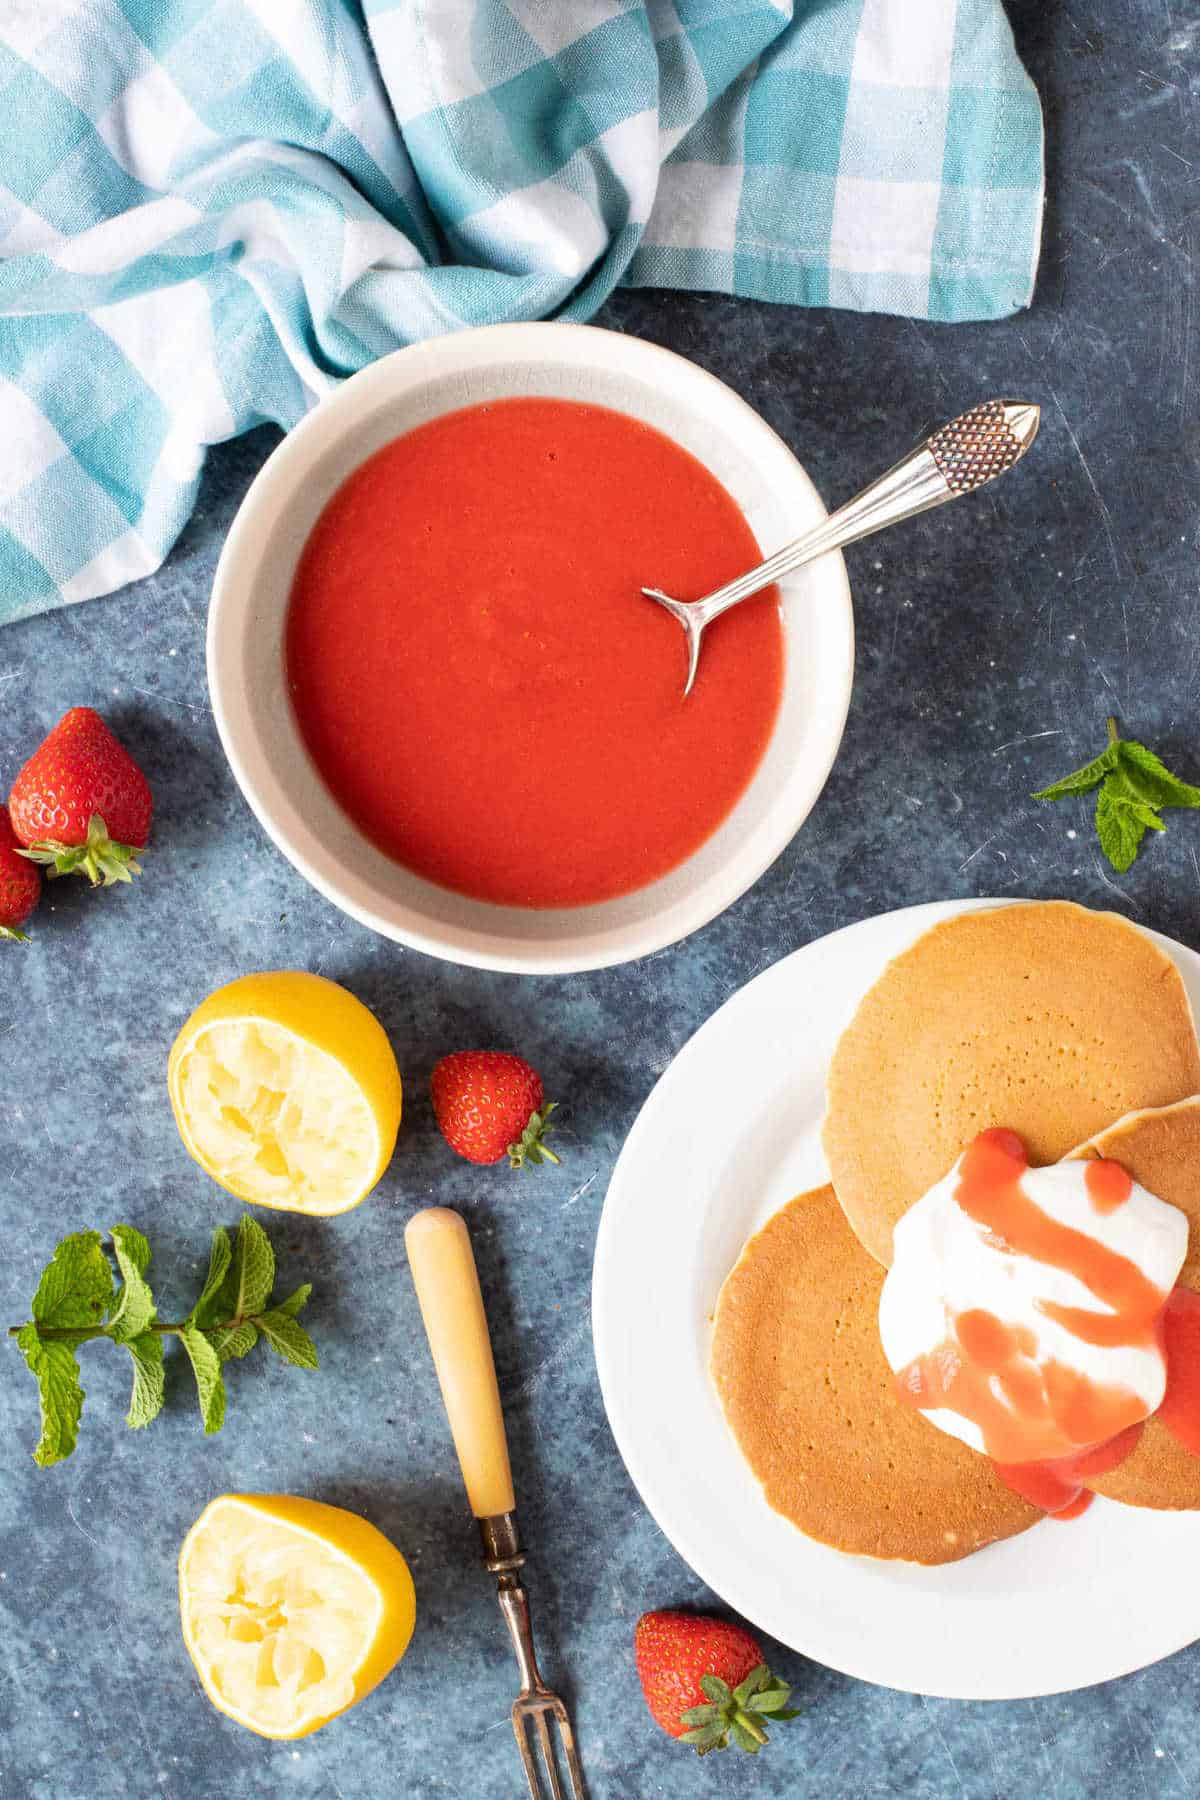 Strawberry coulis in a bowl and drizzled over pancakes.